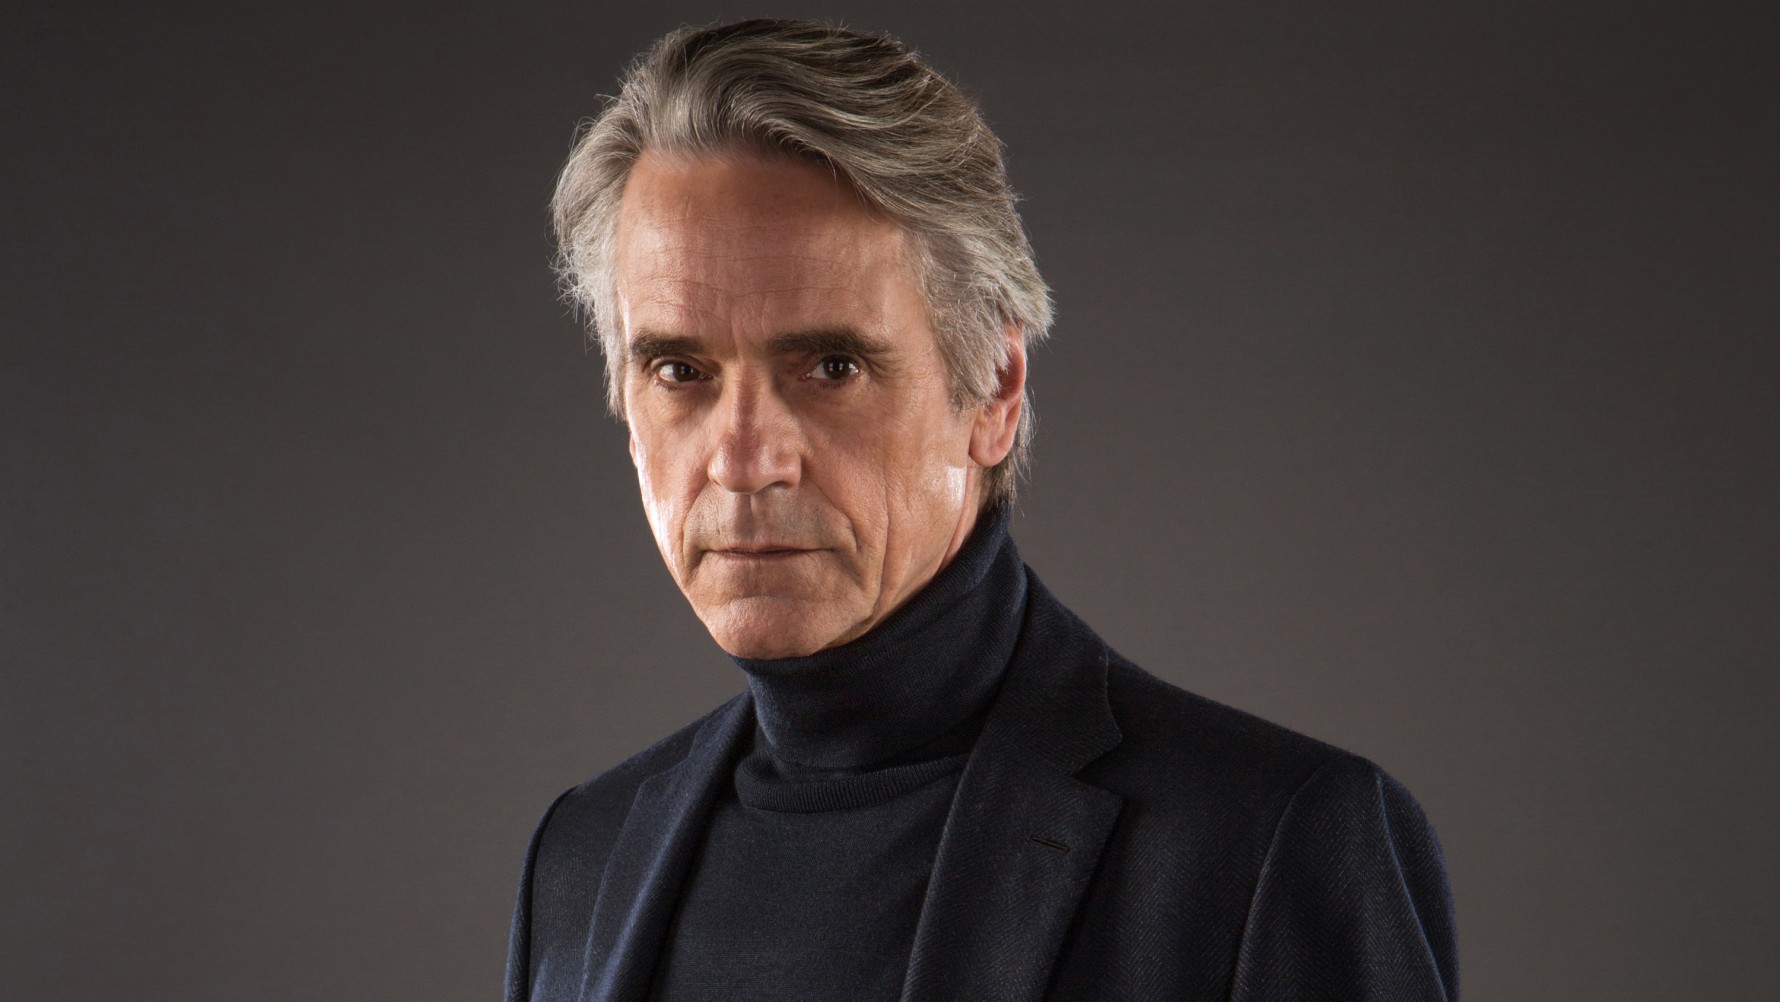 Berlinale Archive News And Topics News And Press Releases Jeremy Irons Will Be The Jury 5462